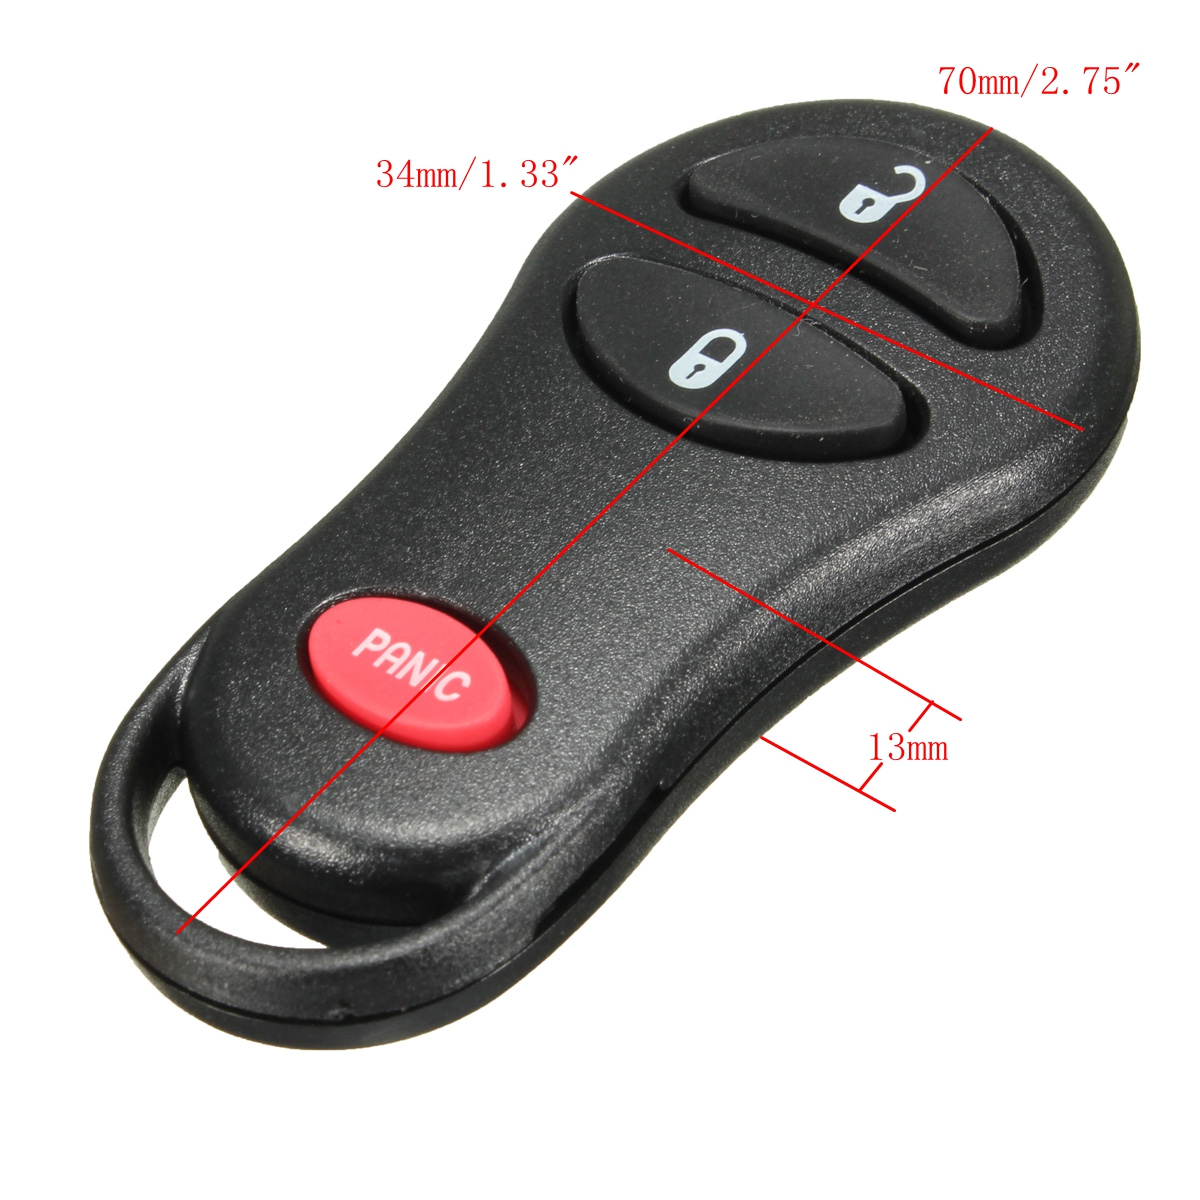 Replacement keyless entry remote jeep #2